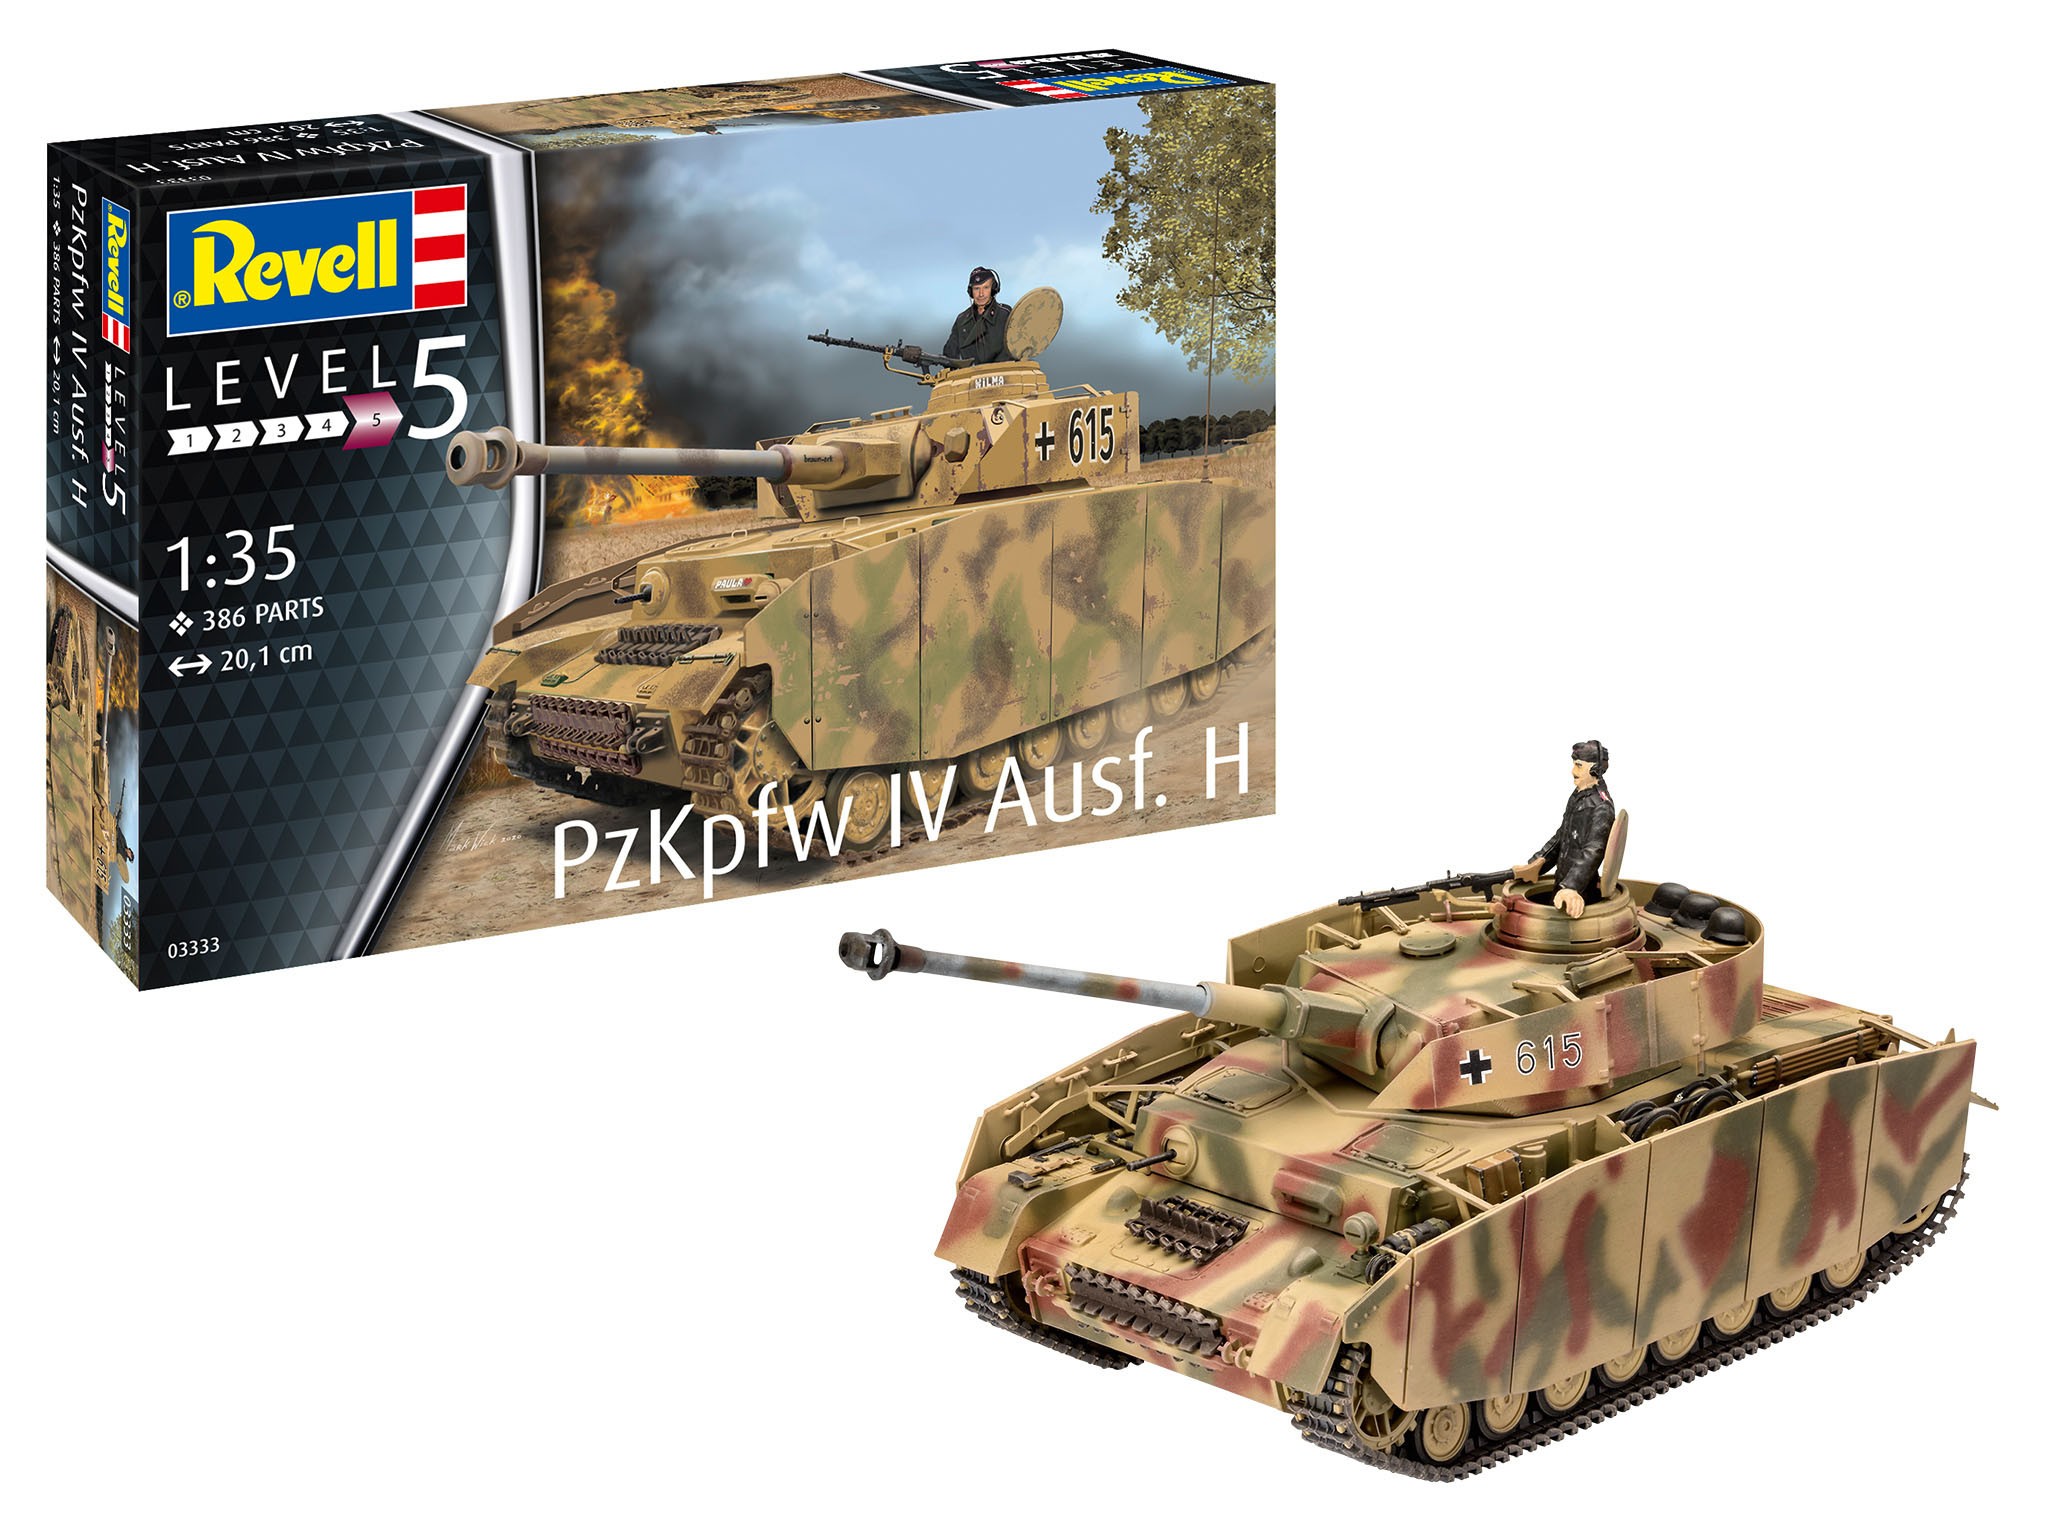 Maquette Revell PANZER IV AUSF. H- 1/35 - Maquette militaire